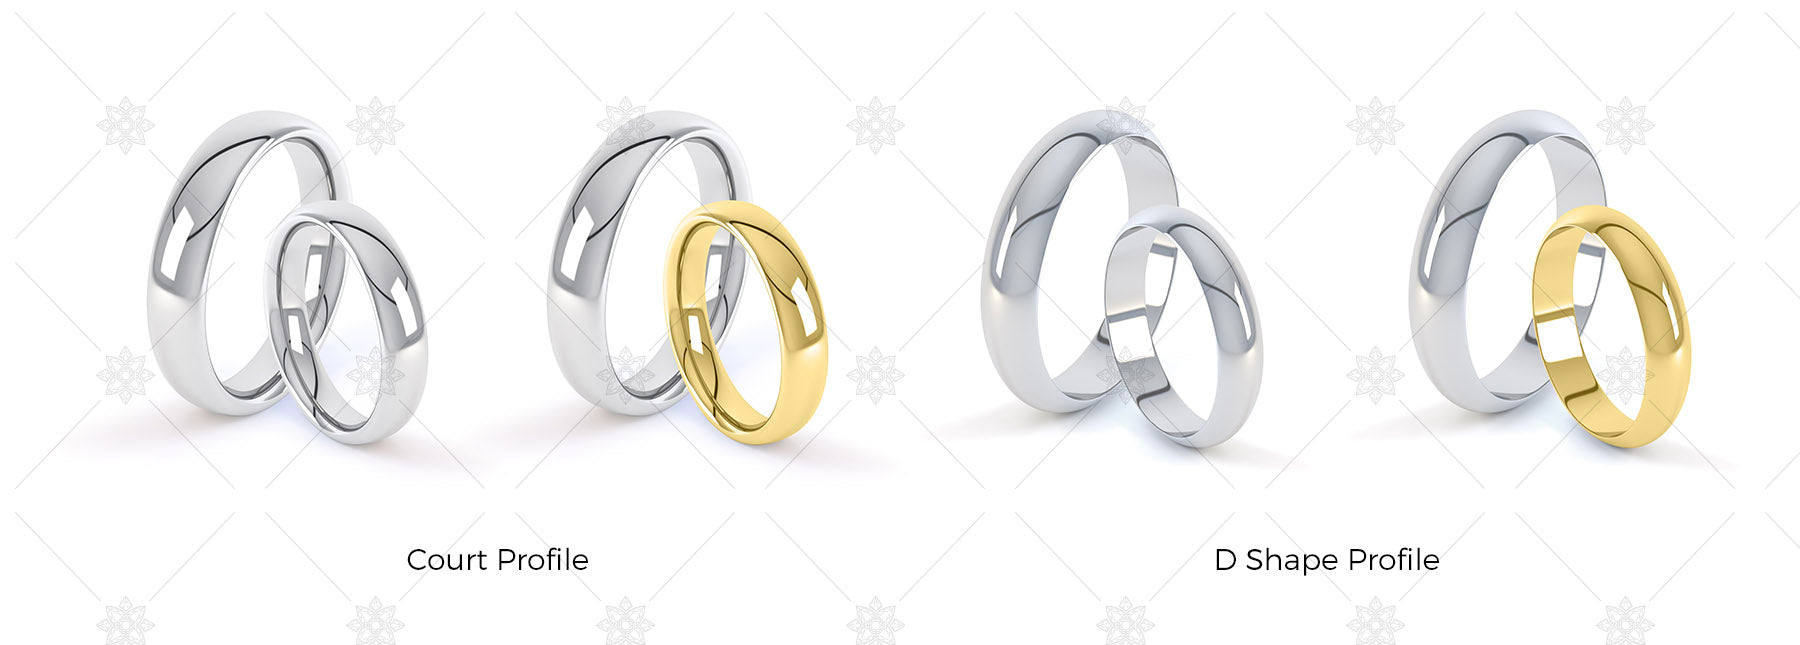 Wedding rings double profile images retail pack